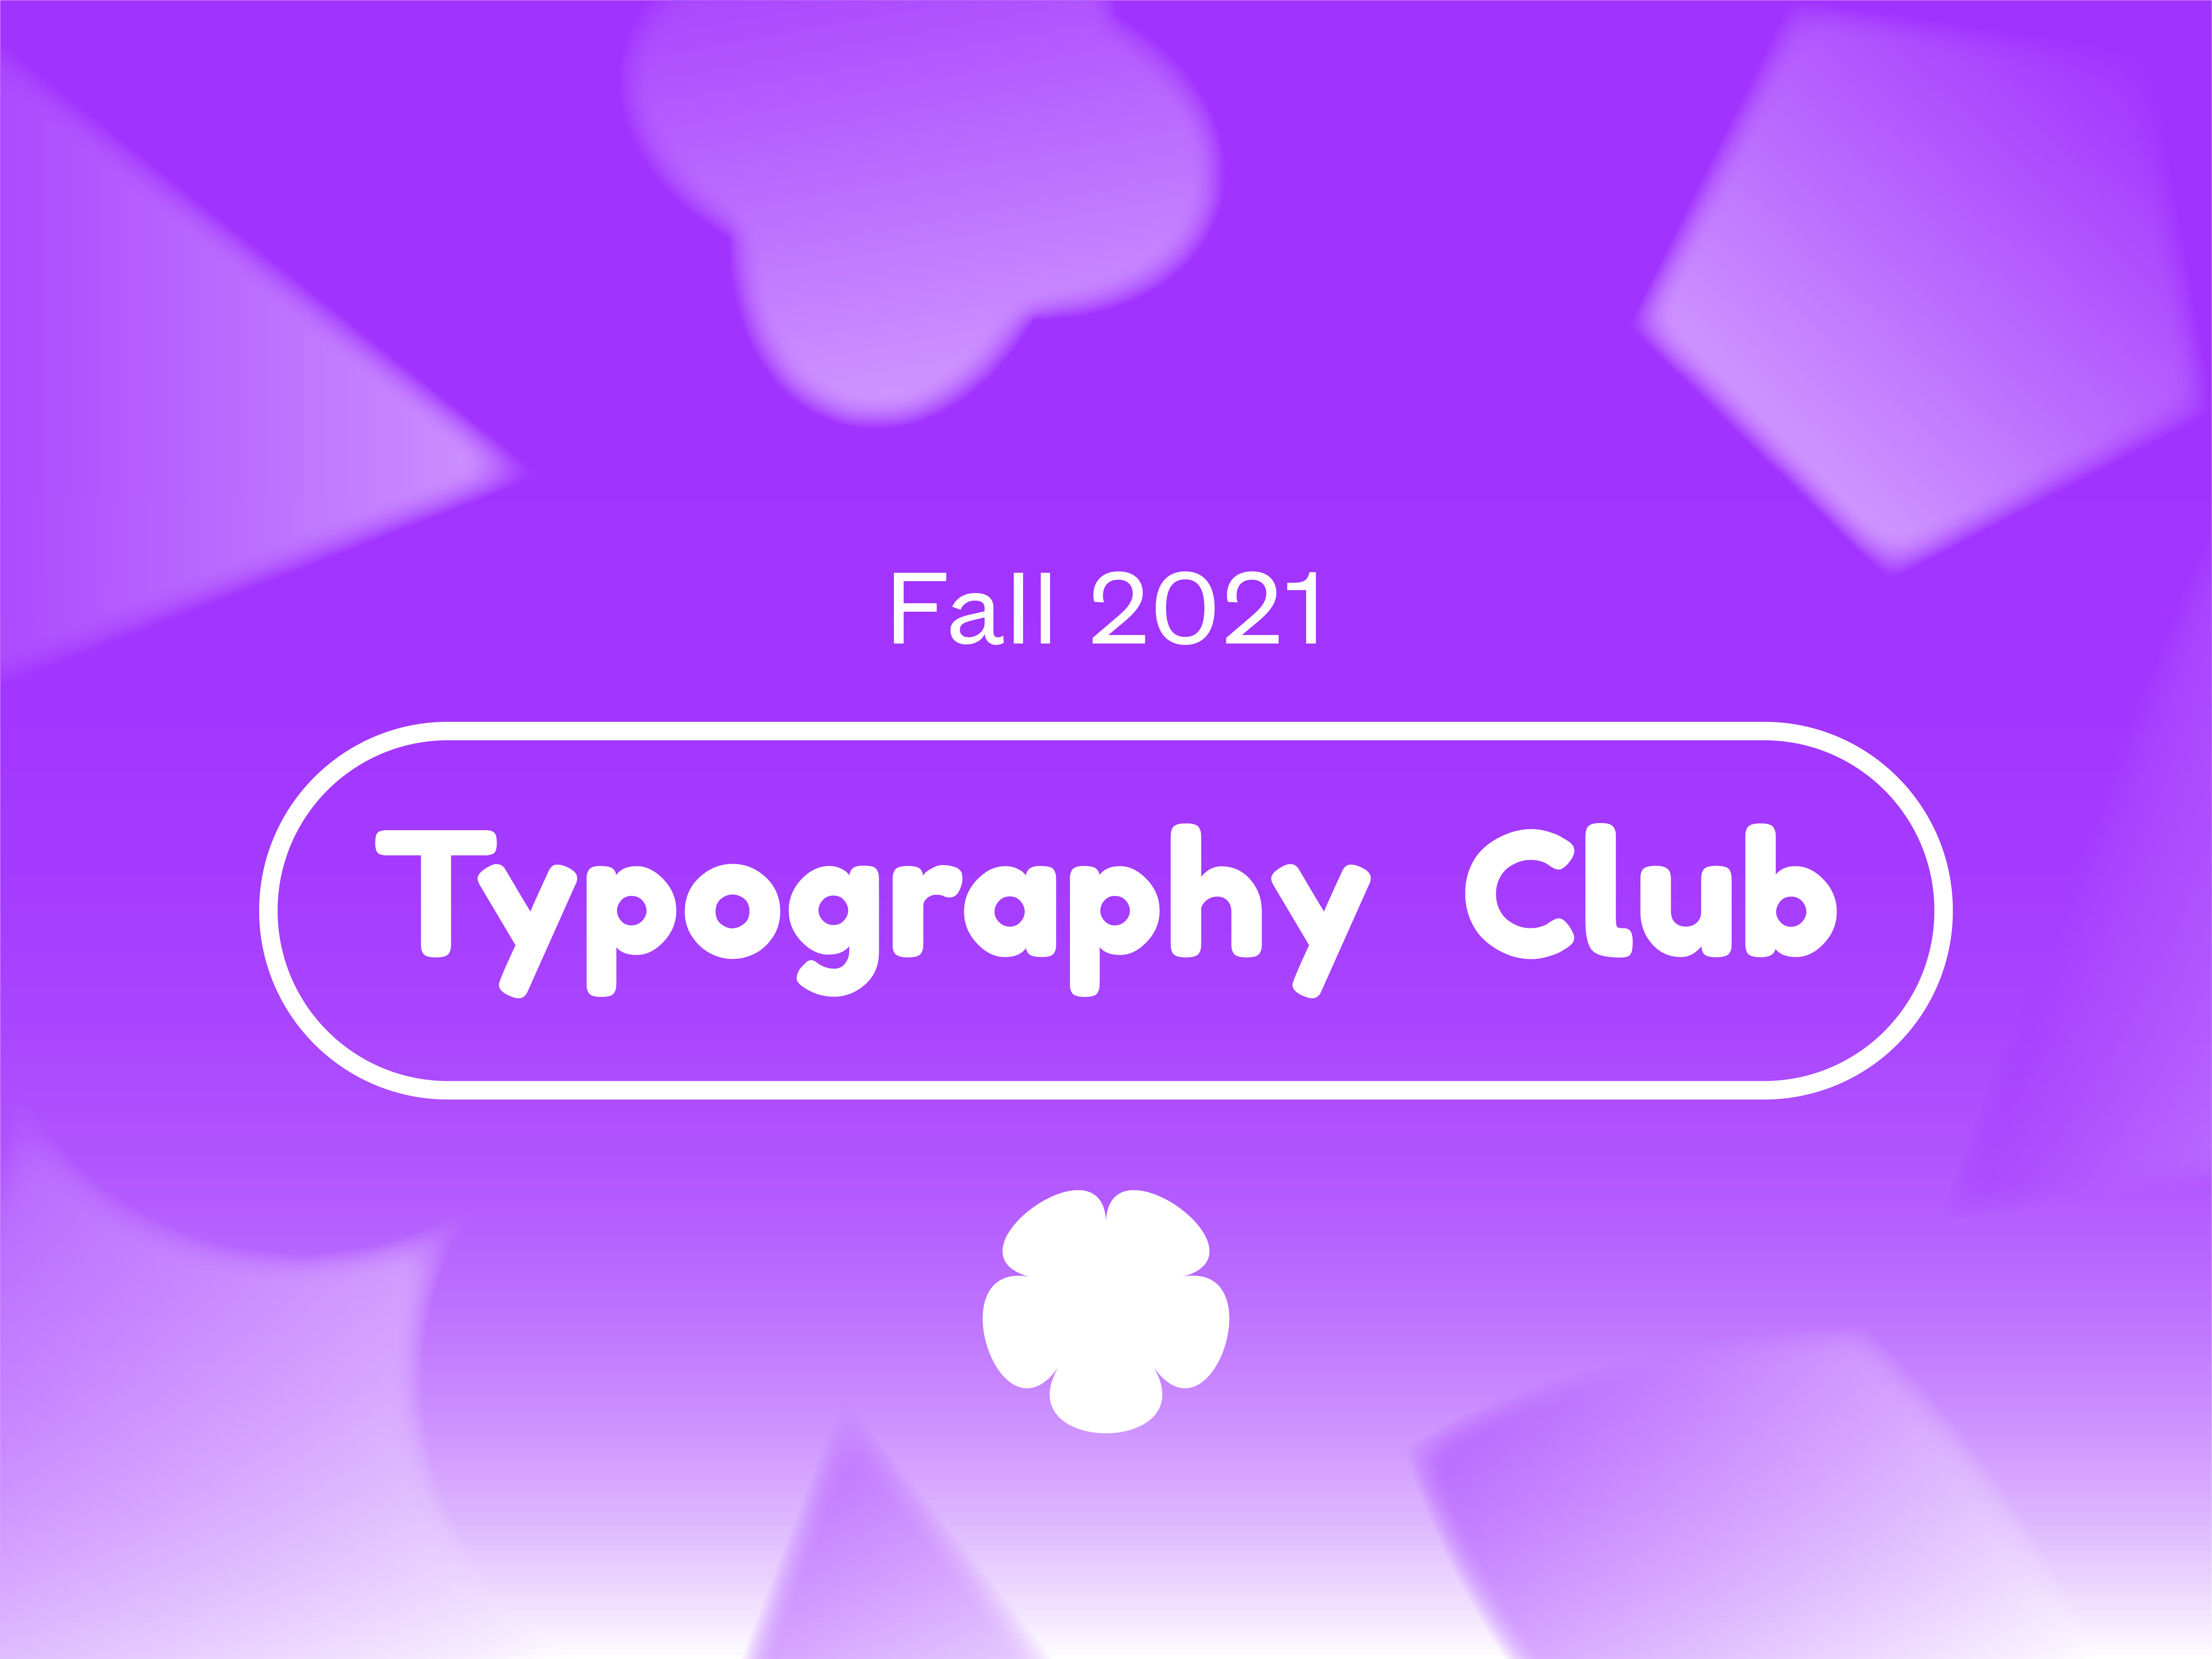 About the Typography Club